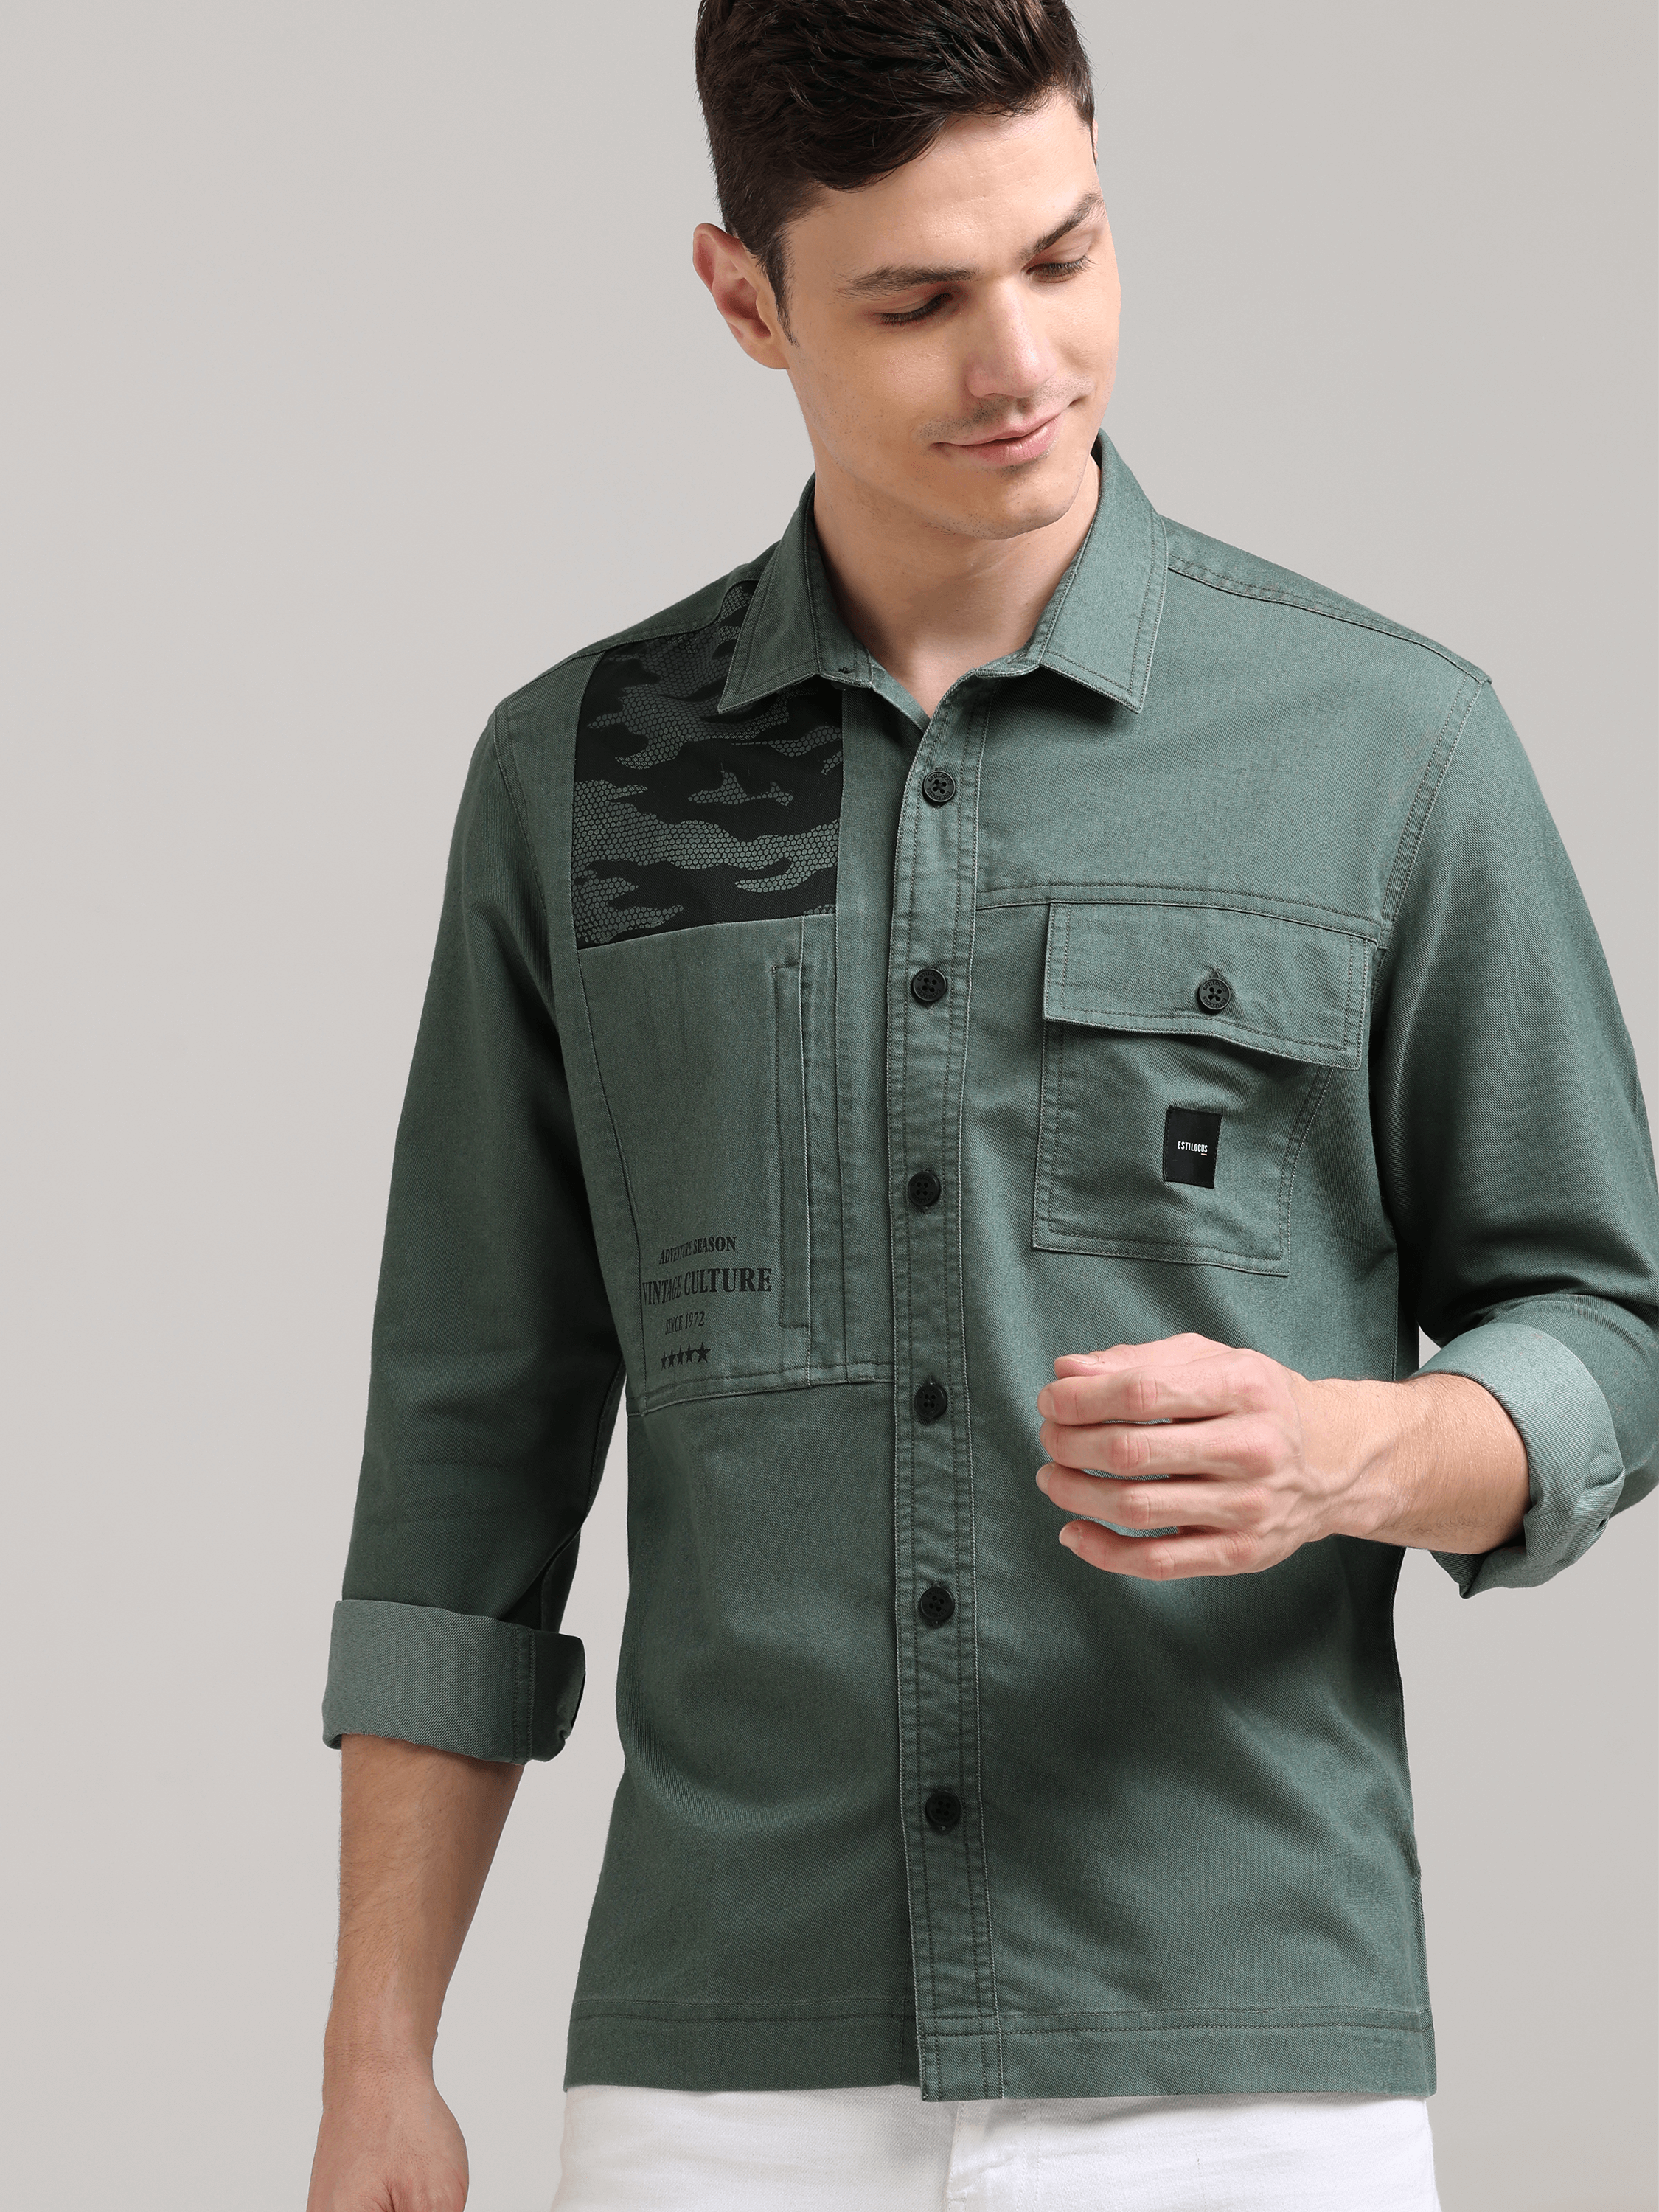 Olive, dark denim shirt and cream trousers. Great colour combination | Mens  casual outfits summer, Mens fashion casual outfits, Safari jacket